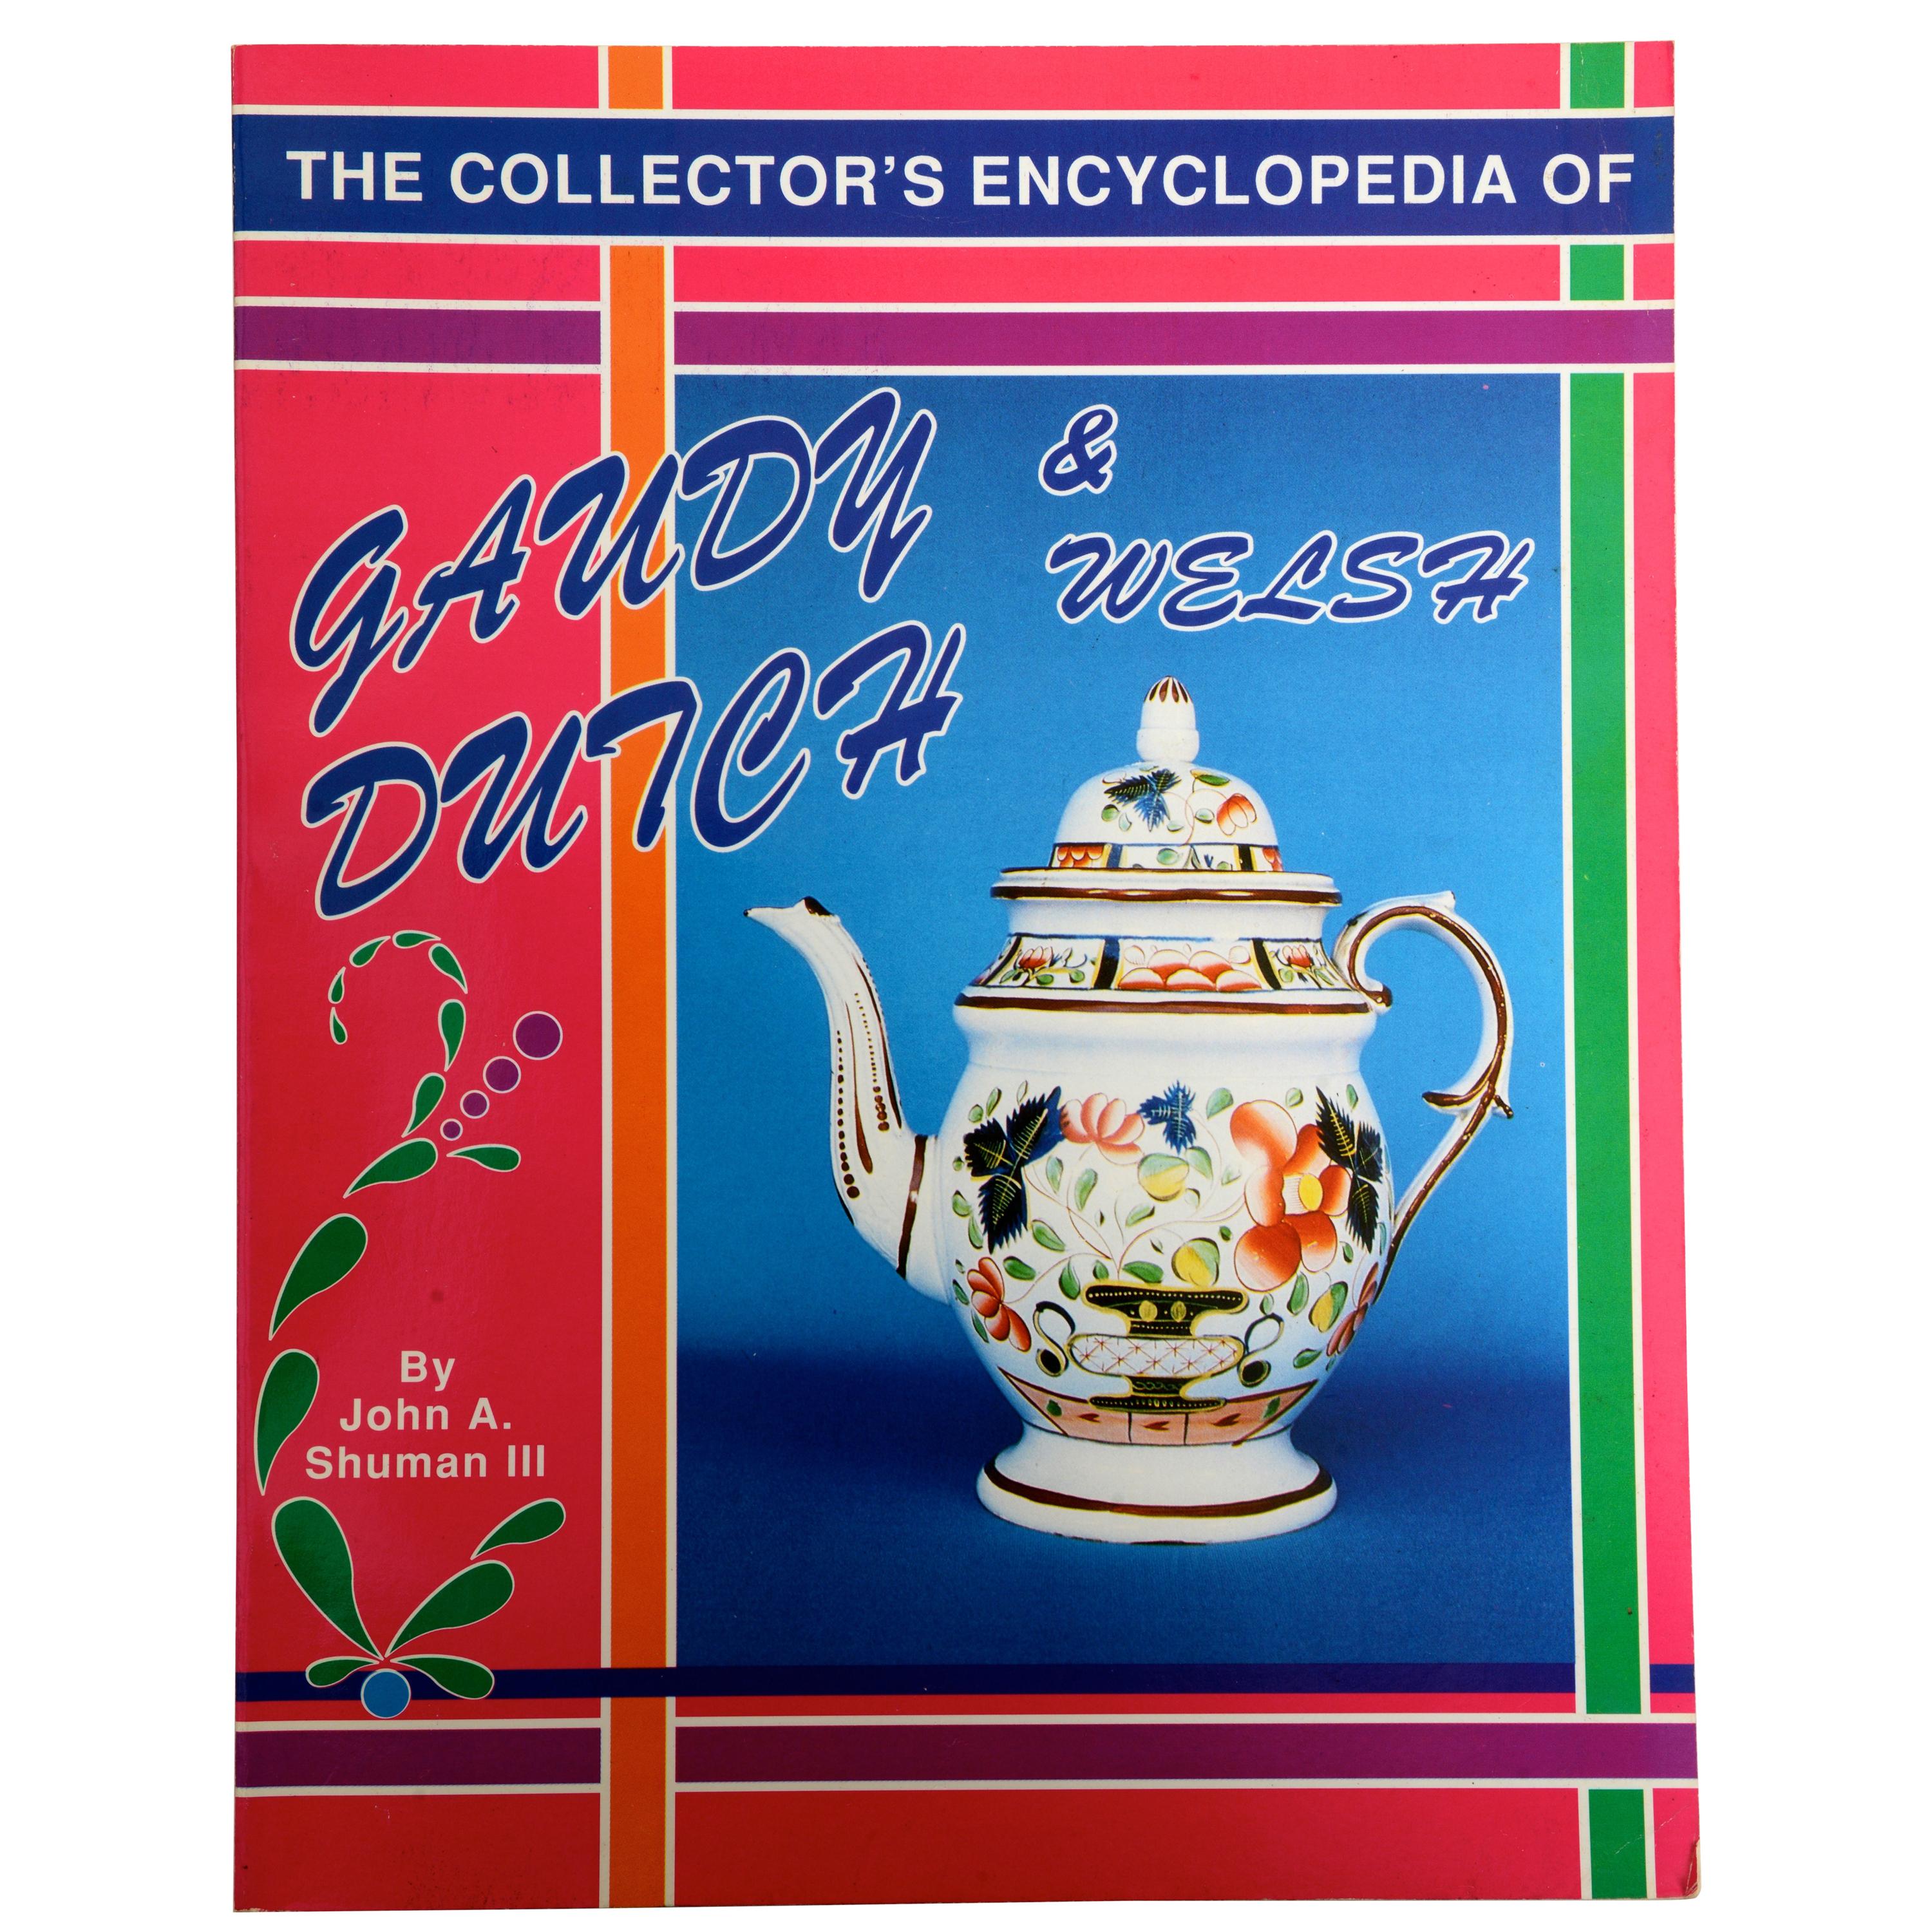 The Collector's Encyclopedia of Gaudy Dutch and Welsh by John Human, First Ed